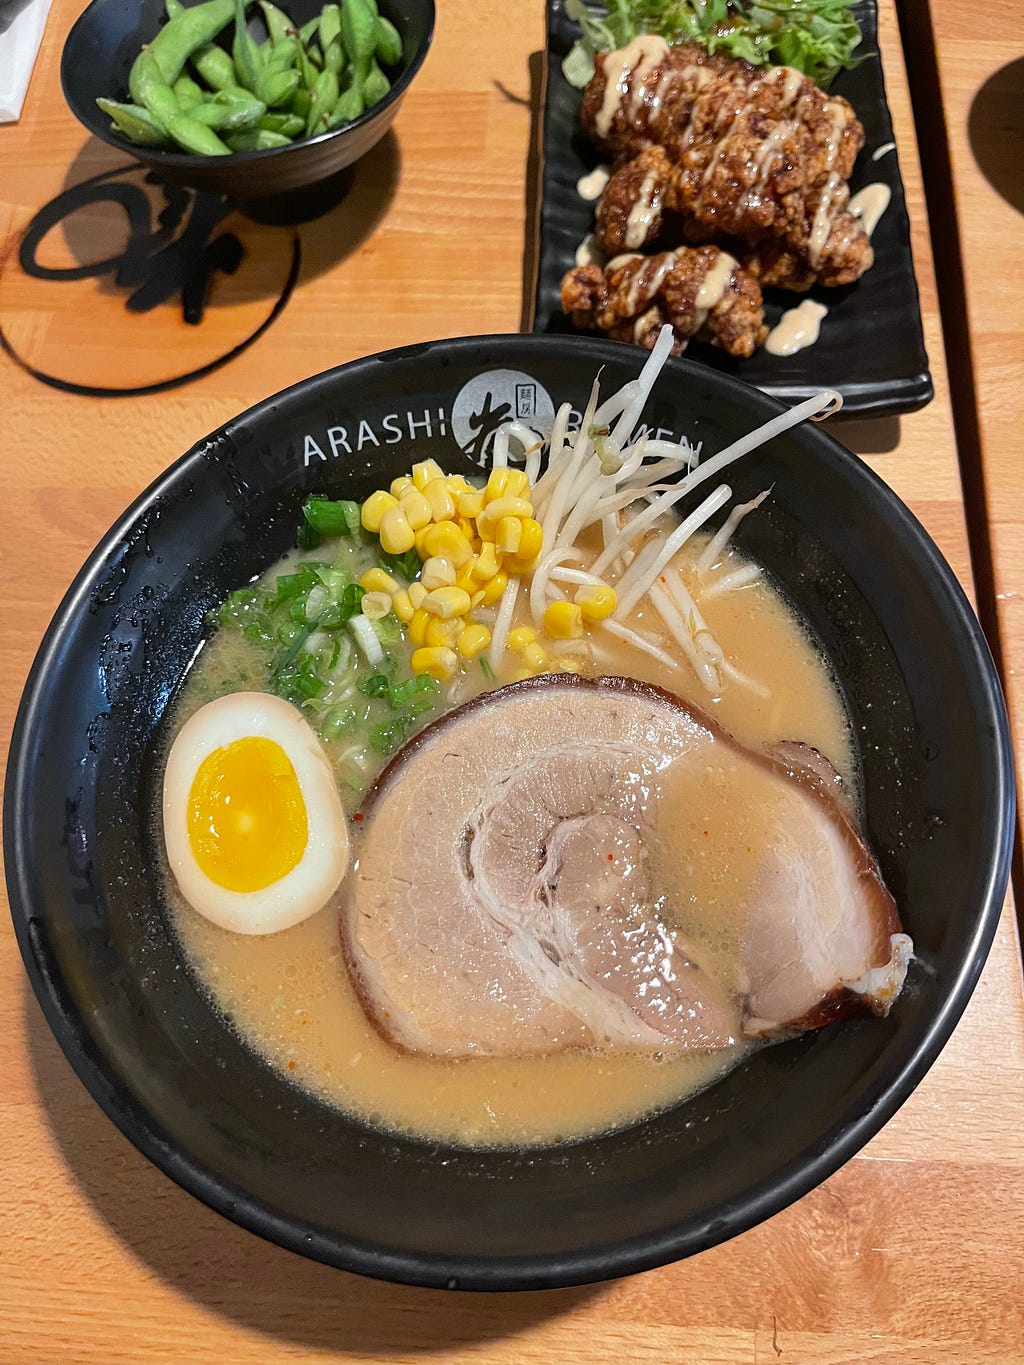 A bowl of pork broth ramen on a wooden table